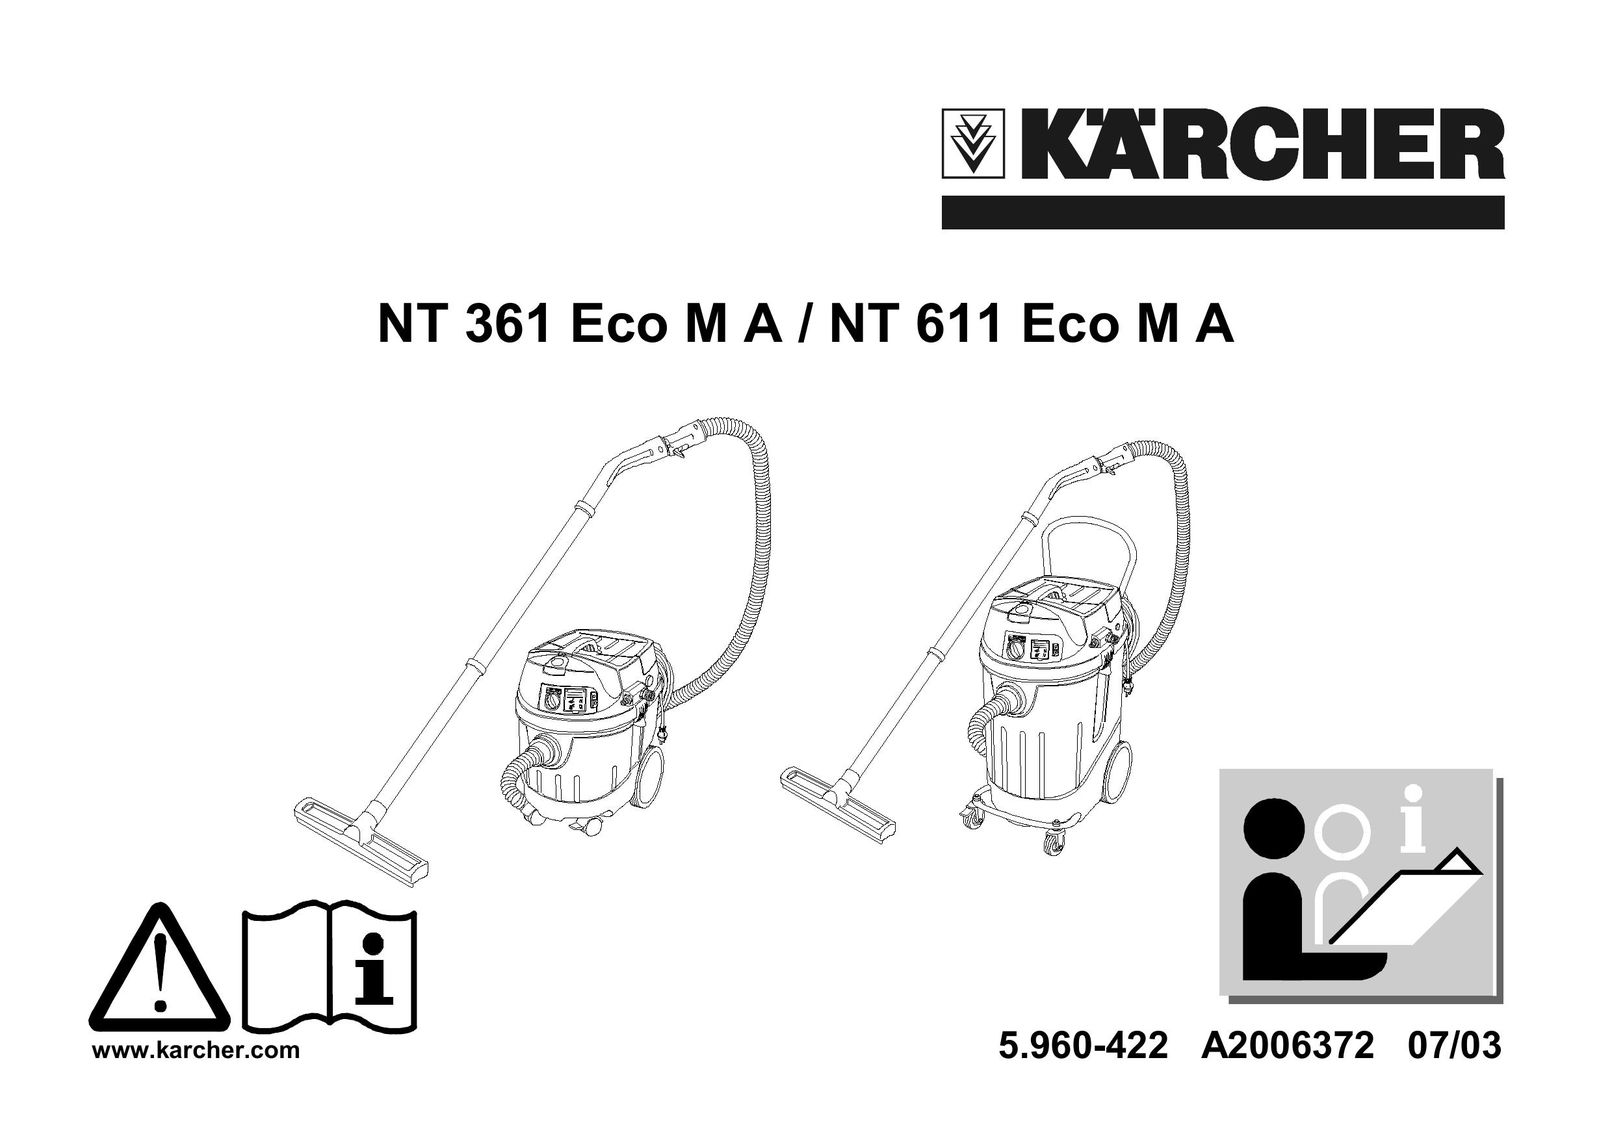 Karcher NT 611 ECO M A Vacuum Cleaner User Manual